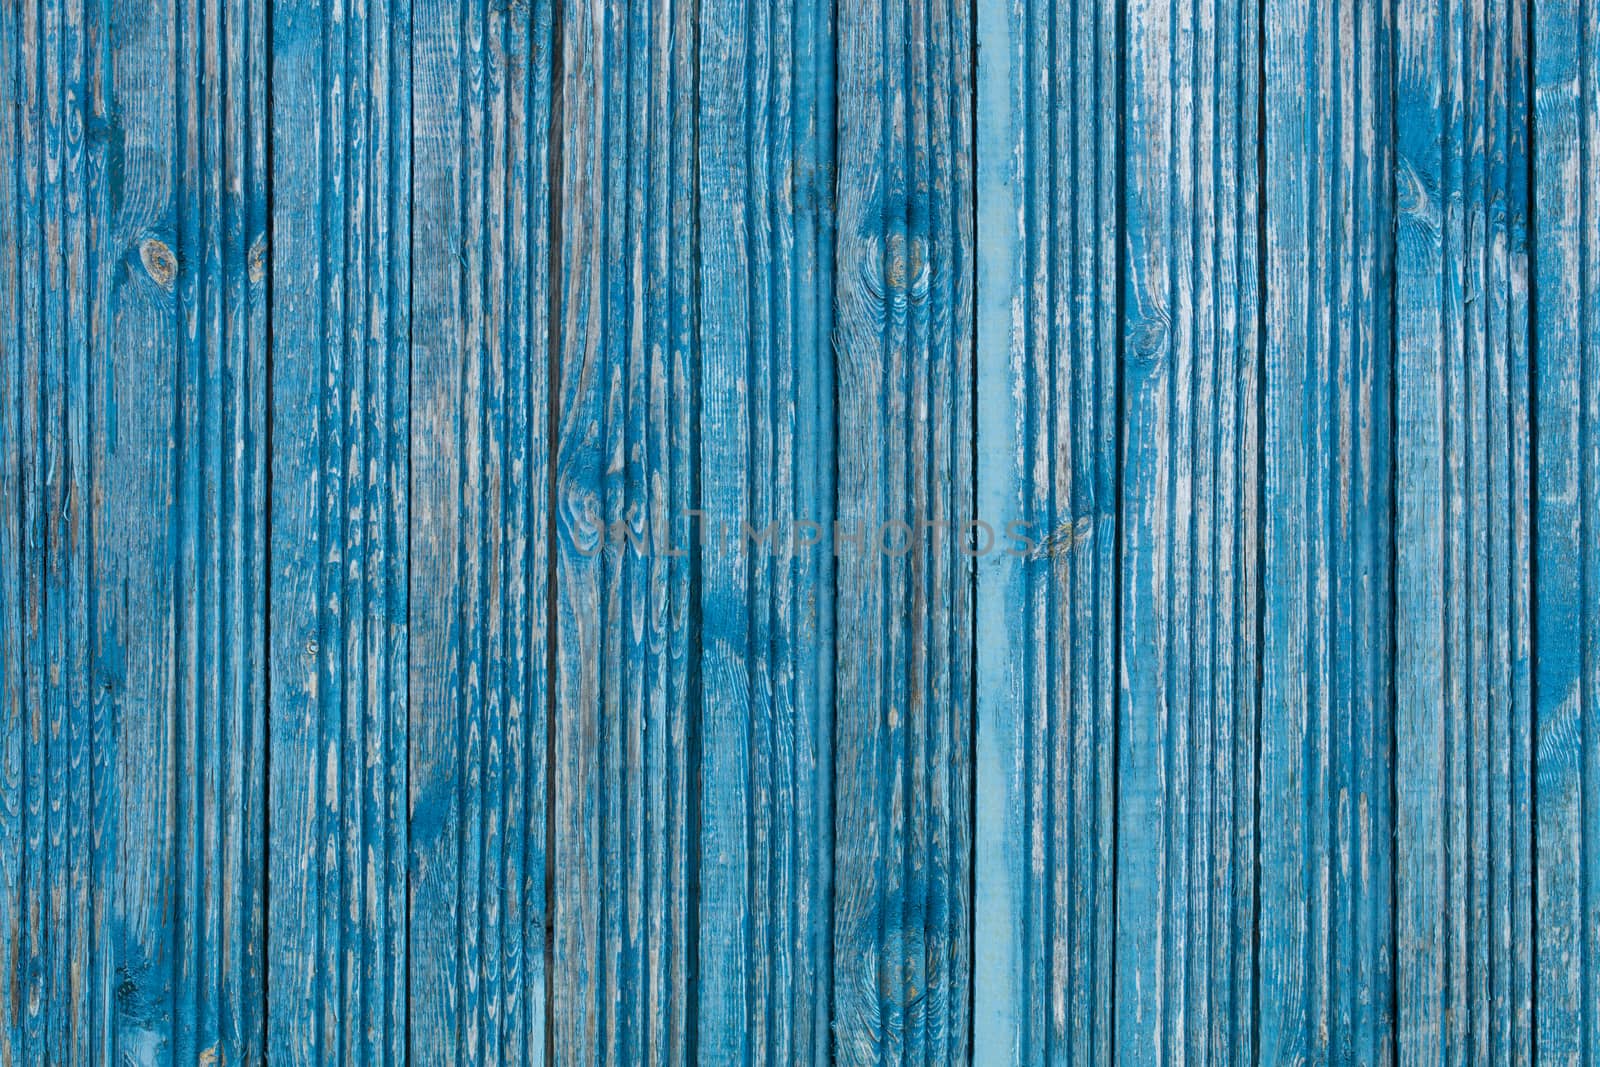 Shabby blue paint on old wooden boards and wood texture